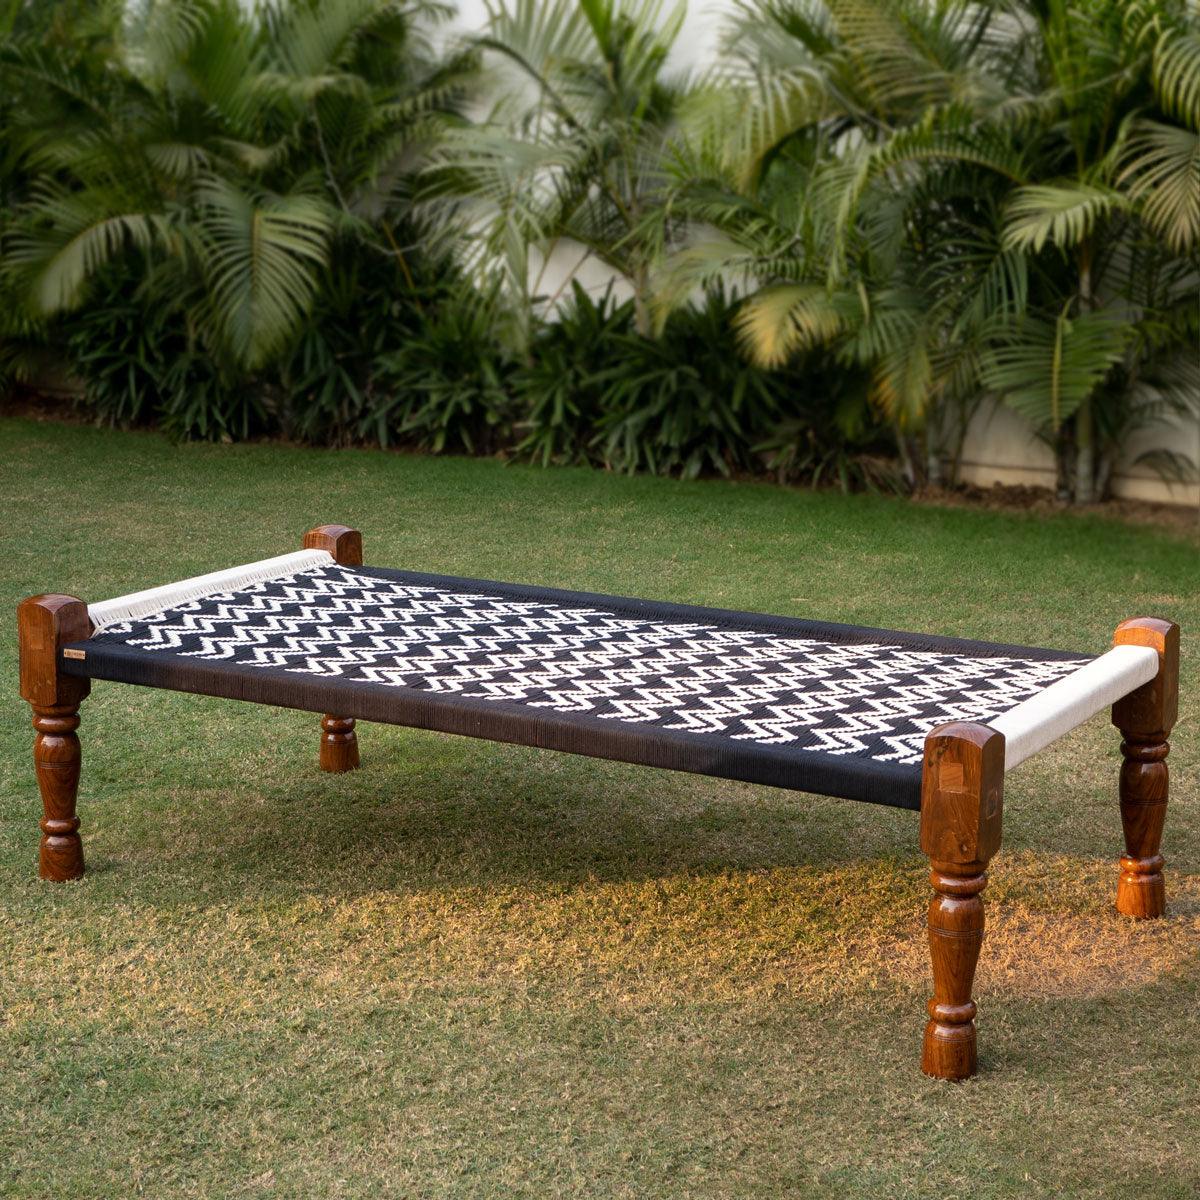 Double Wave Cotton Charpai - Sirohi.org - Purpose_Indoor Seating, Purpose_Outdoor Seating, Rope Material_Recycled Cotton